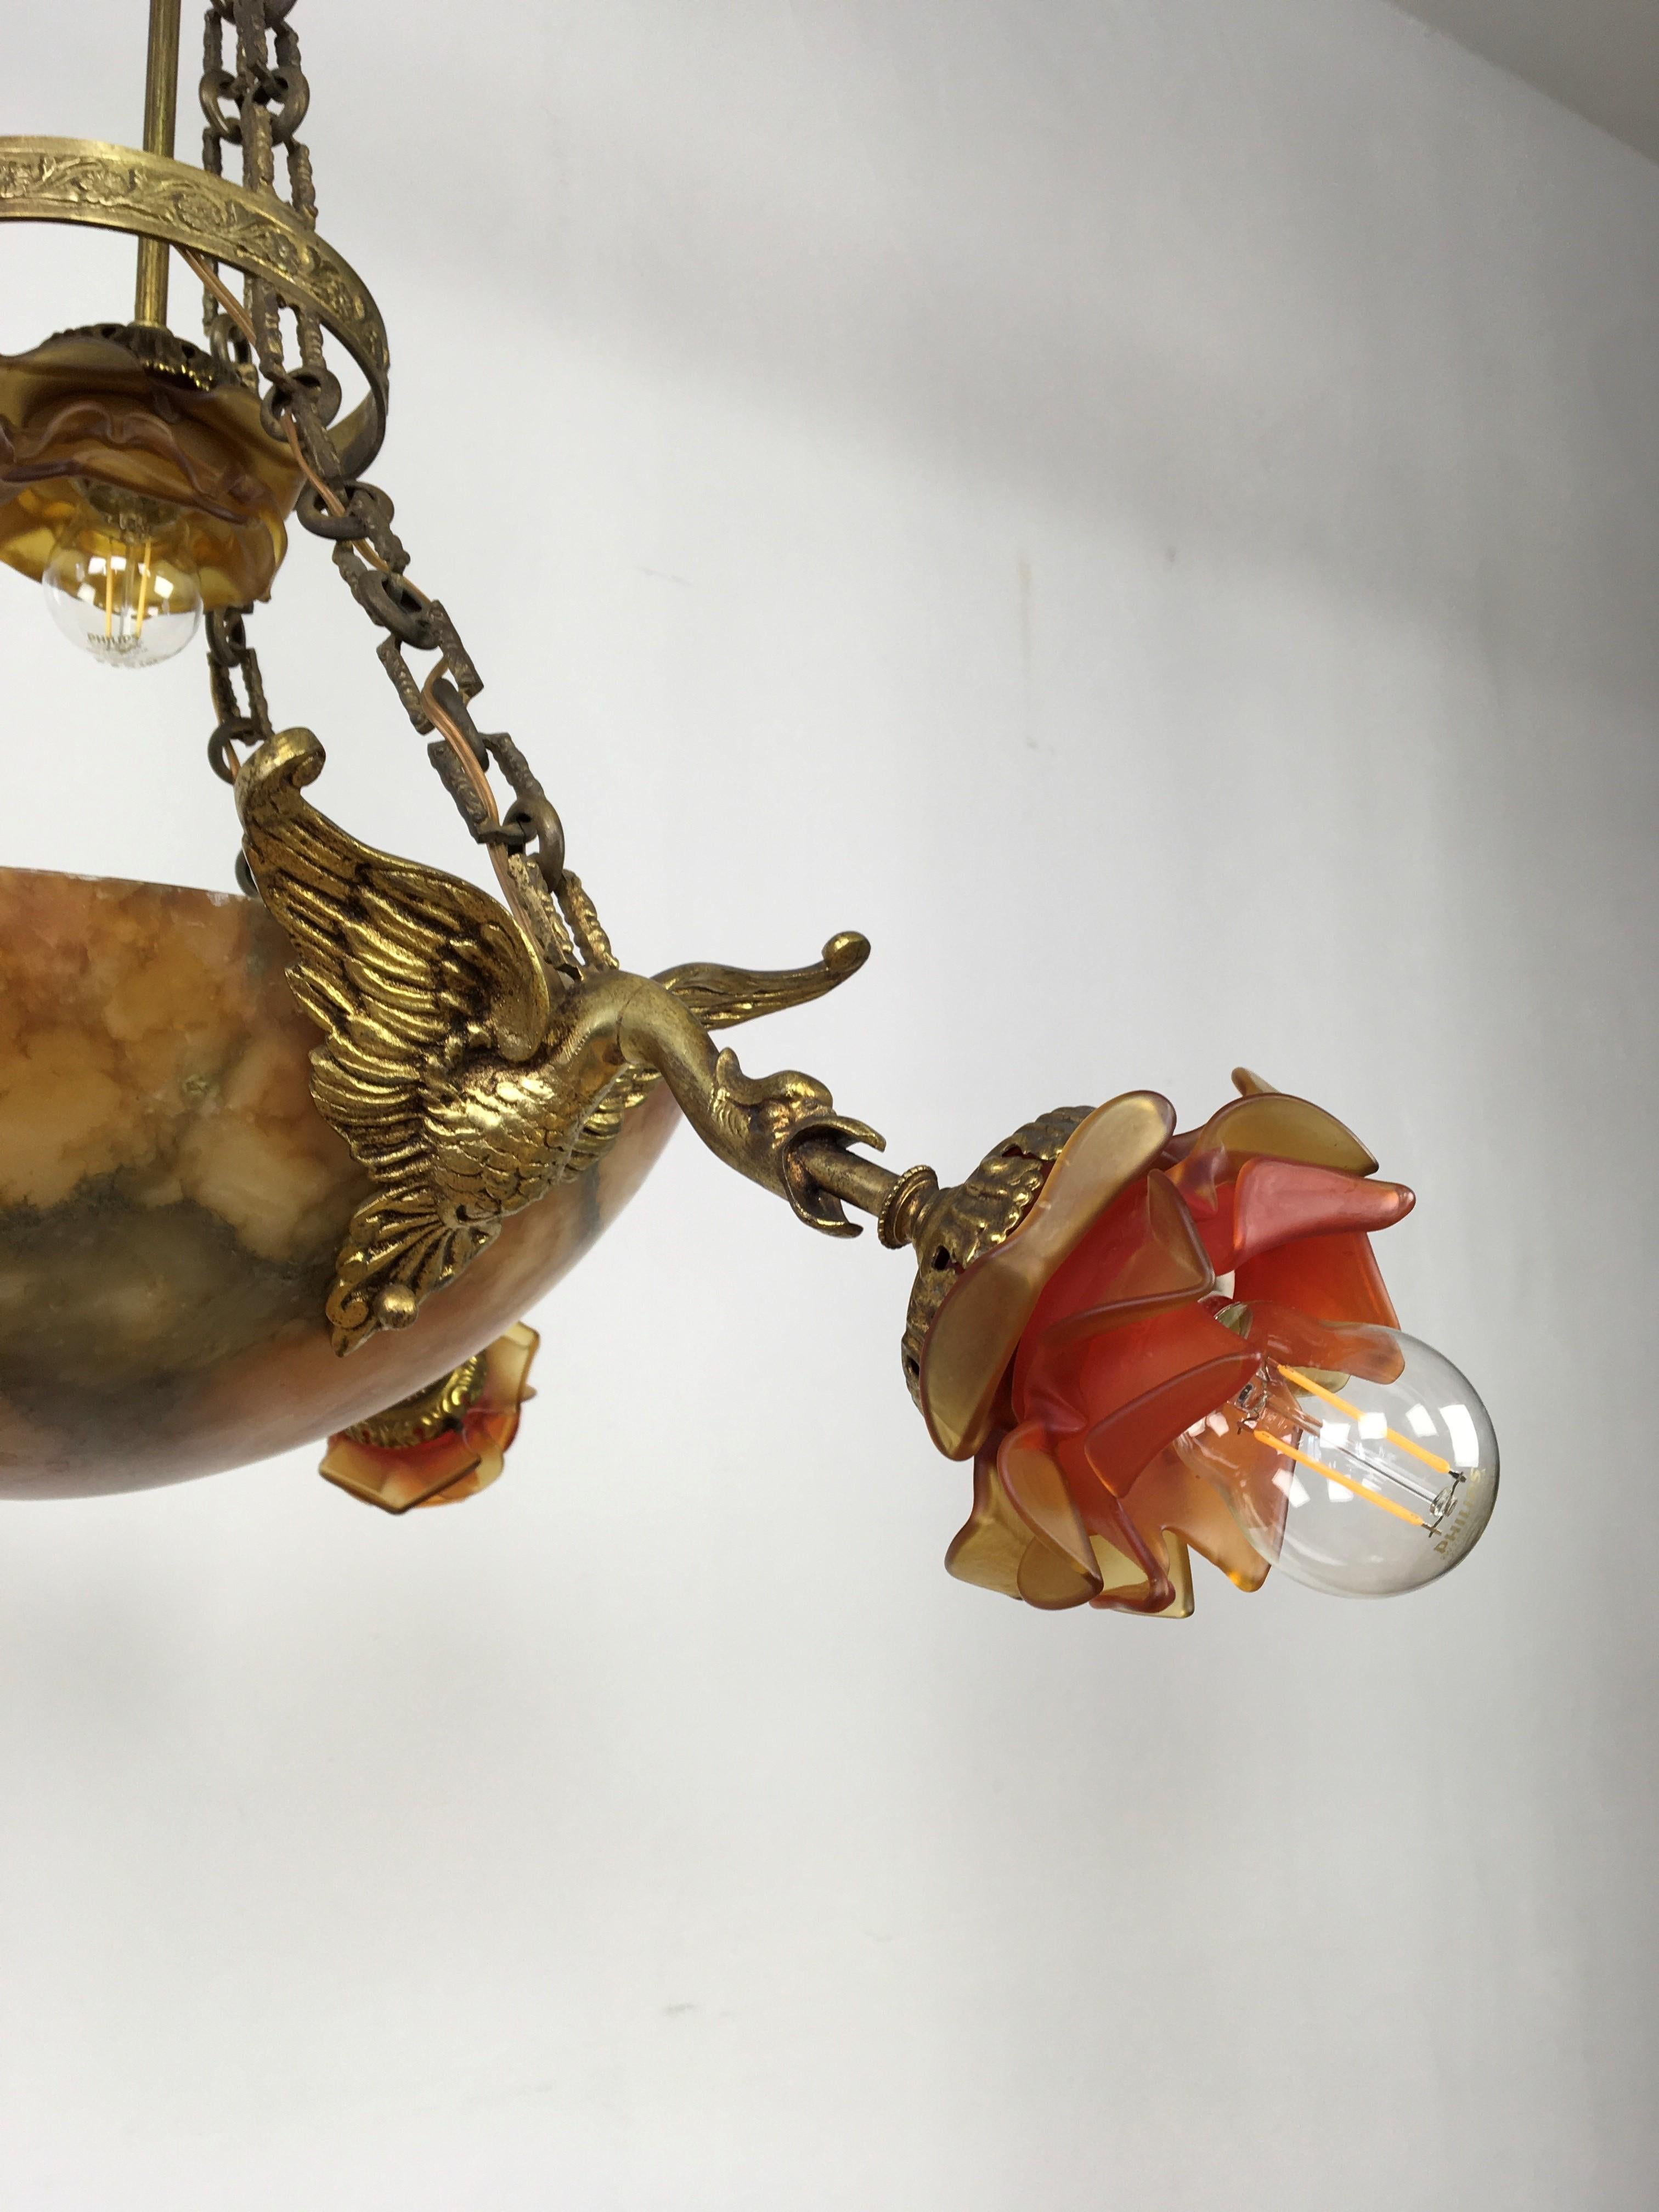 Antique alabaster bowl chandelier. 
A French Alabaster chandelier or pendant consisting a veined amber alabaster bowl, floral lampshades and dragons. 
An Art Deco ceiling light with graceful shades in the shape of roses which are held by a kind of